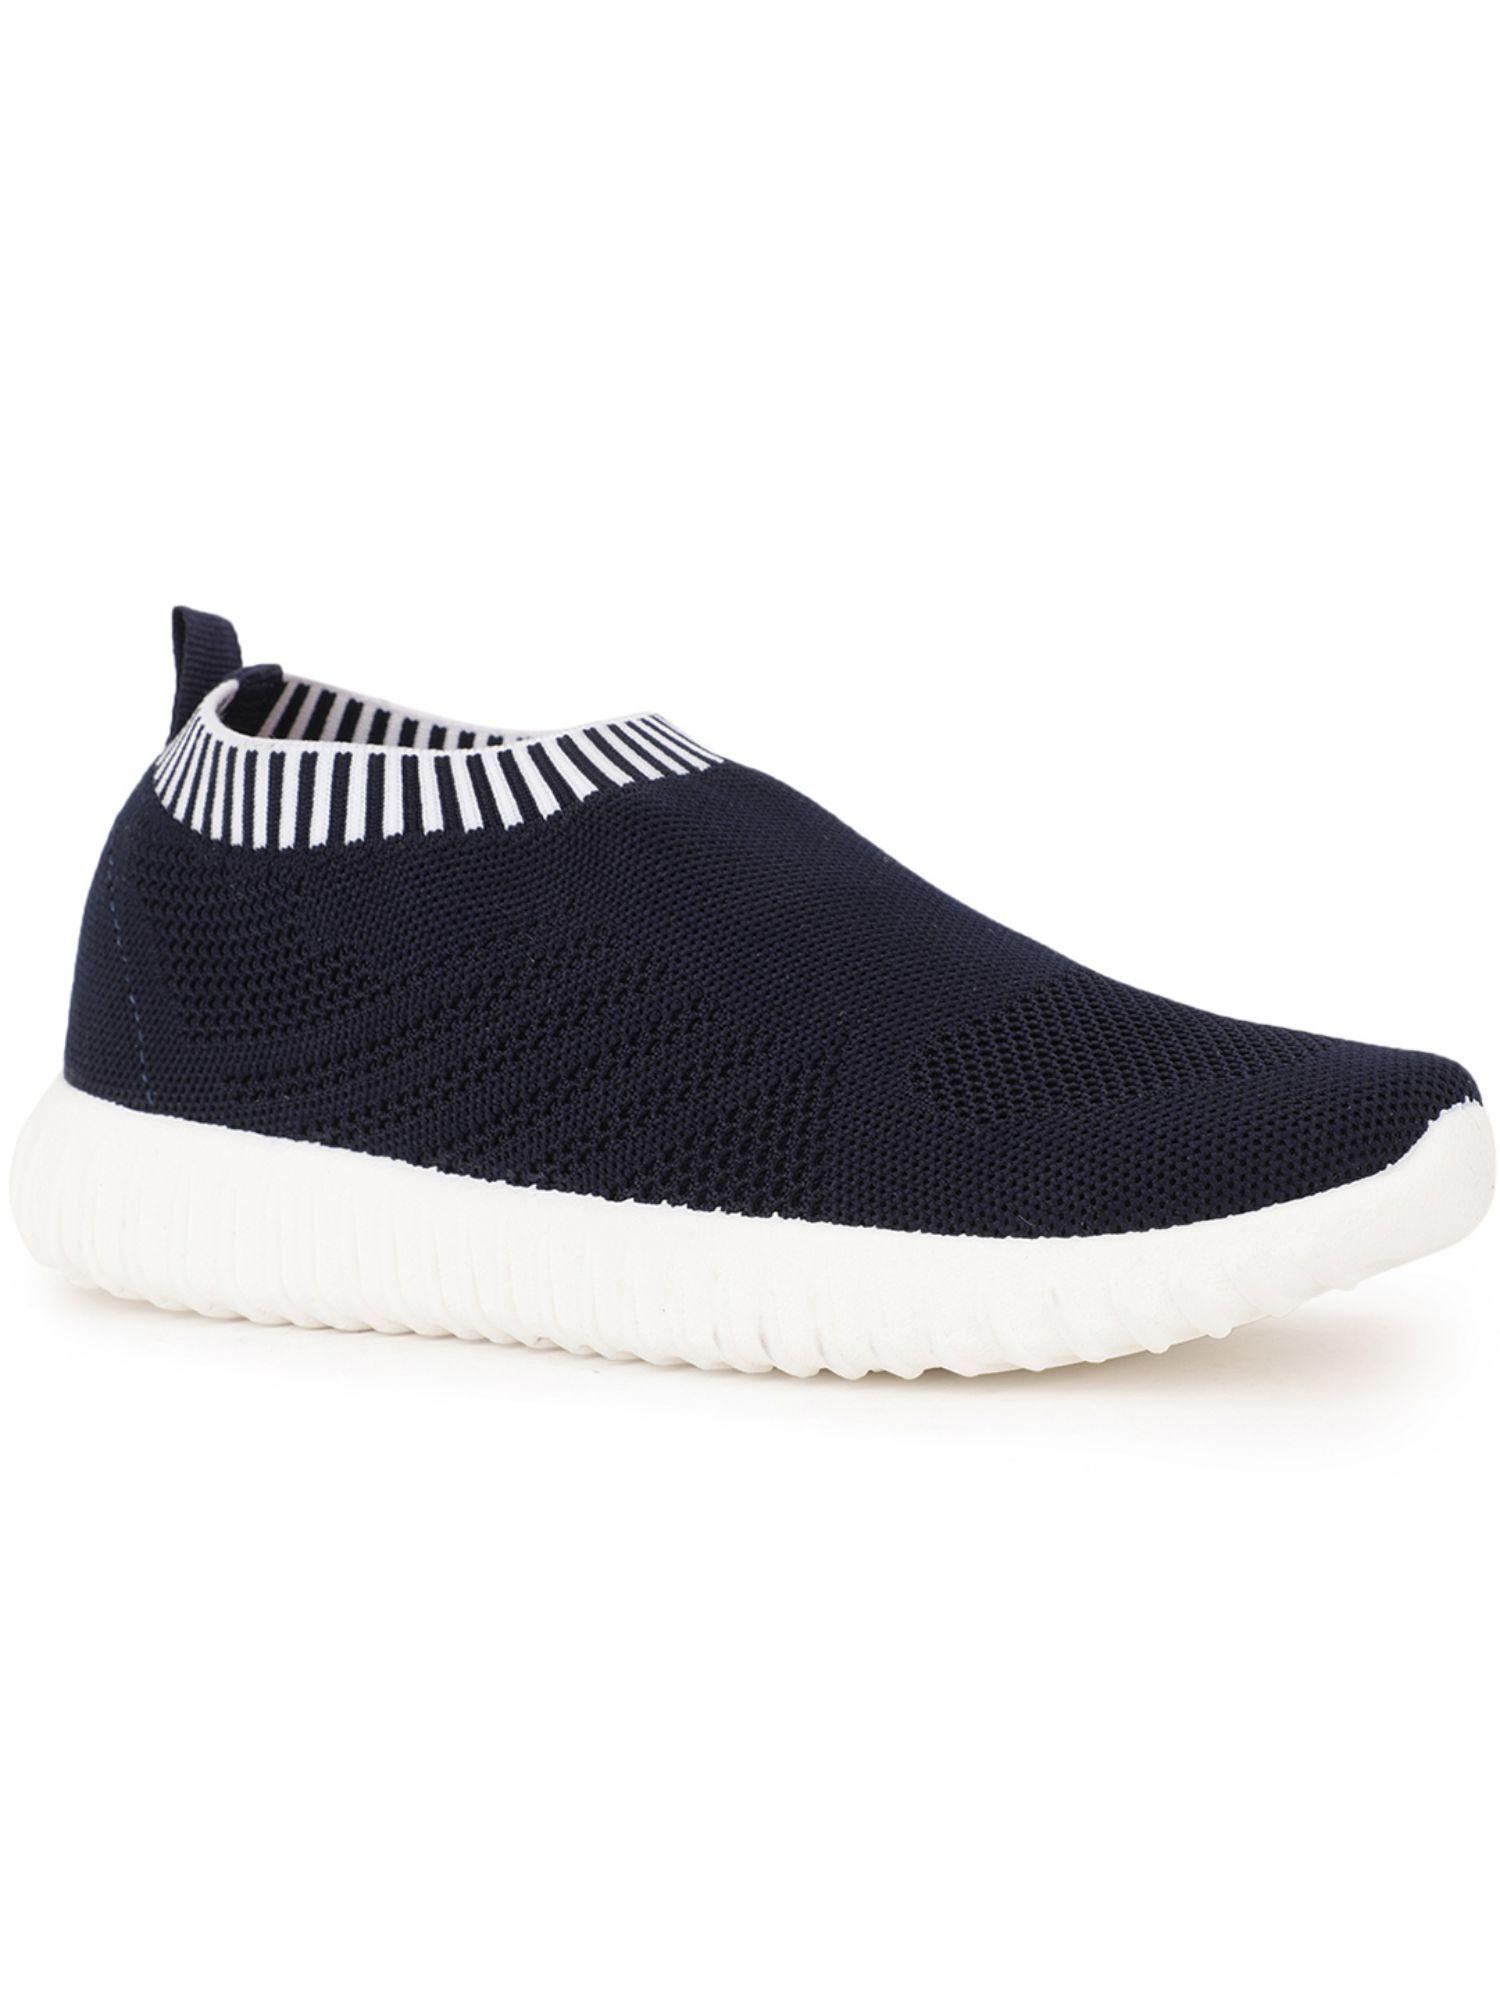 woven-navy-blue-casual-shoes